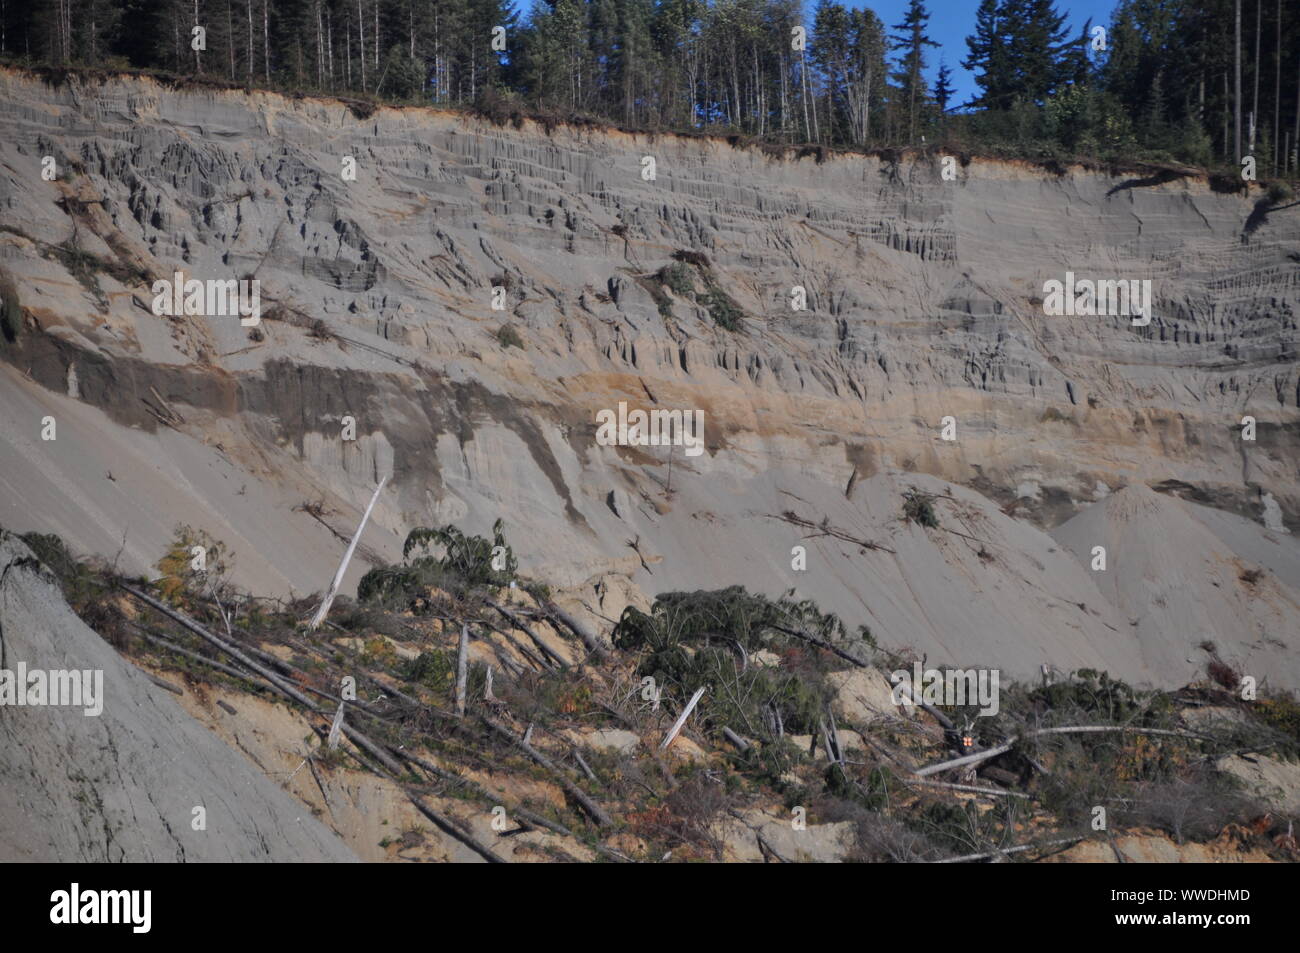 Head Scarp of the deadly 2014 Oso Landslide, North Fork Stillaguamish River Valley, Snohomish County, Washington, USA Stock Photo